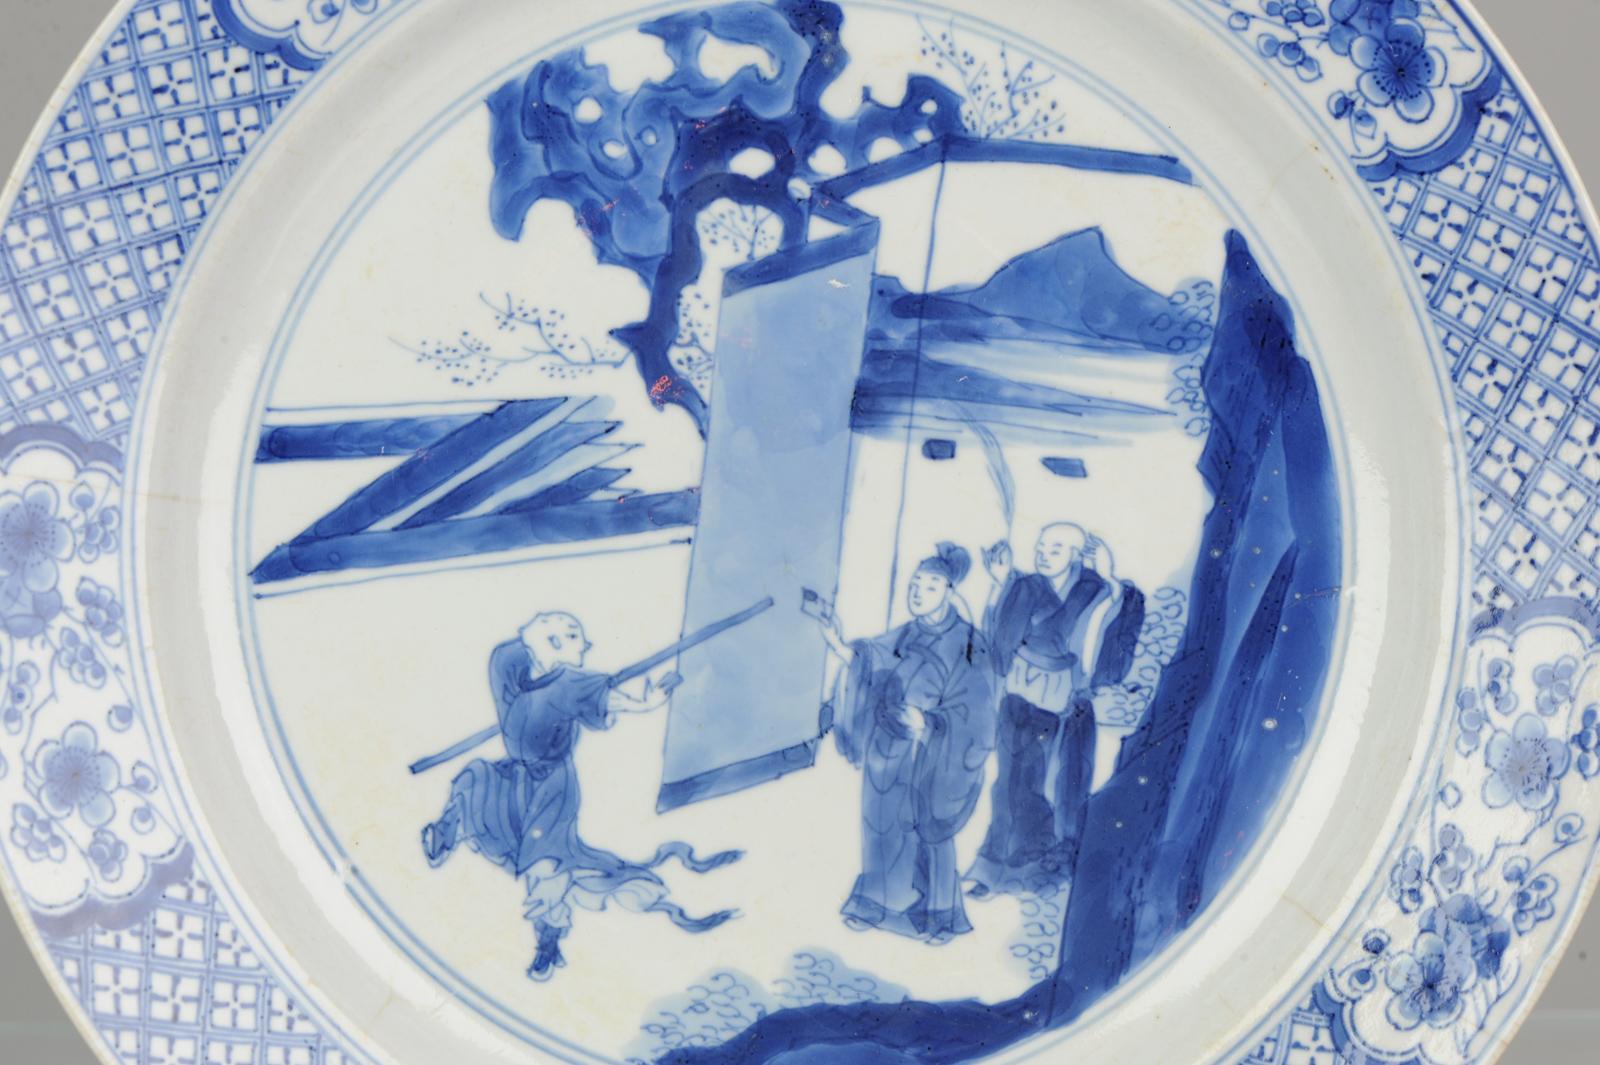 Antique Kangxi Chinese Porcelain Literati Blue and White Figural Plate Marked 1